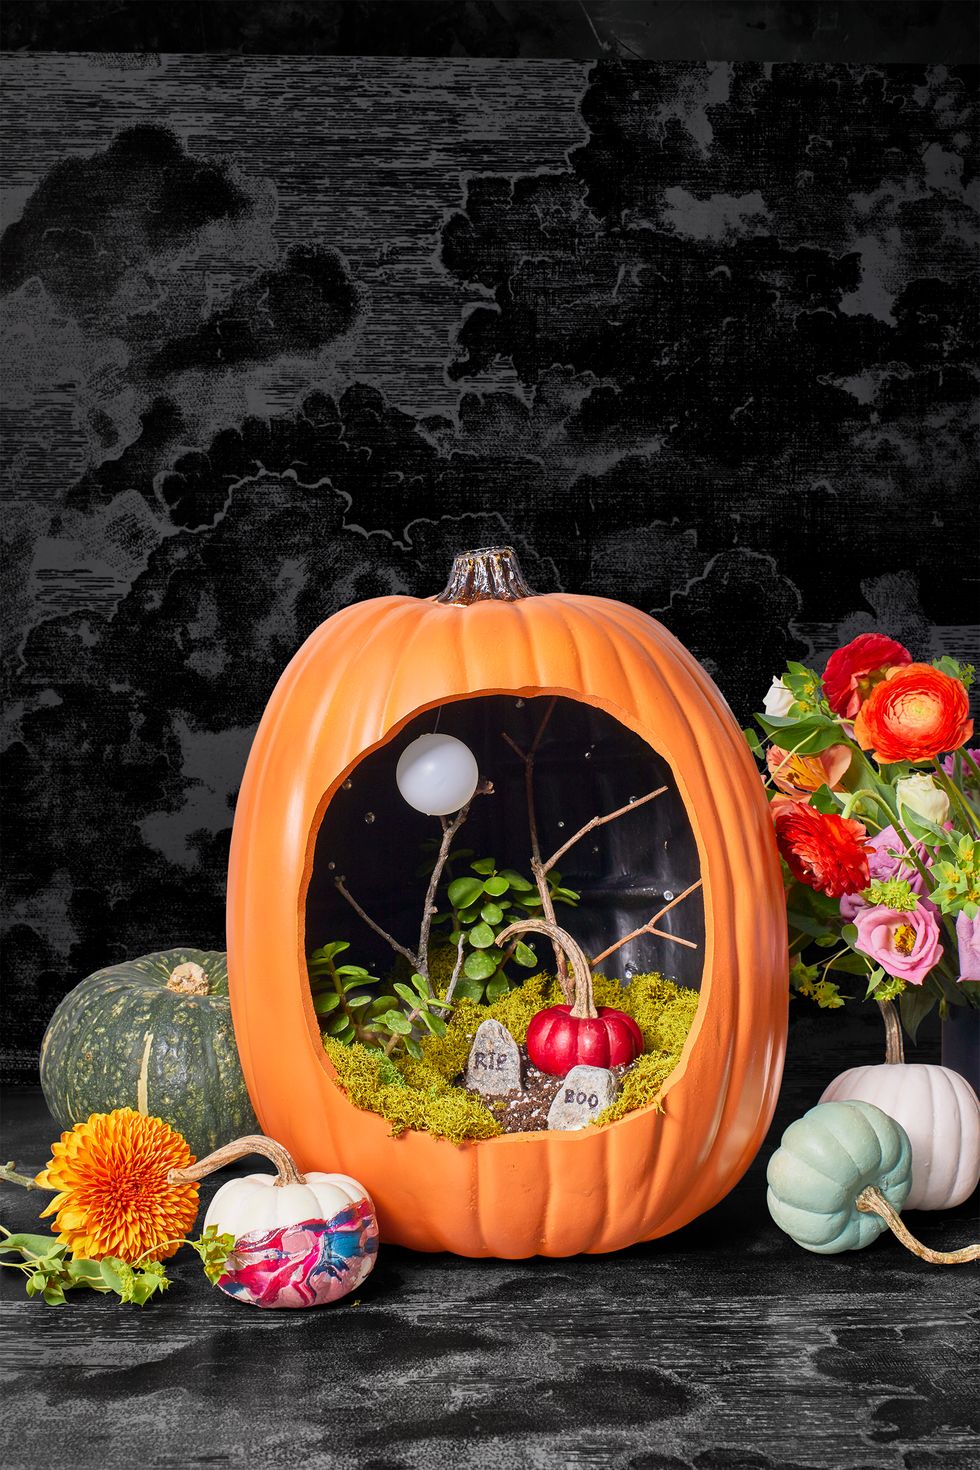 Orange pumpkin with a spooky grave scene set up inside, creating a Halloween-themed decoration